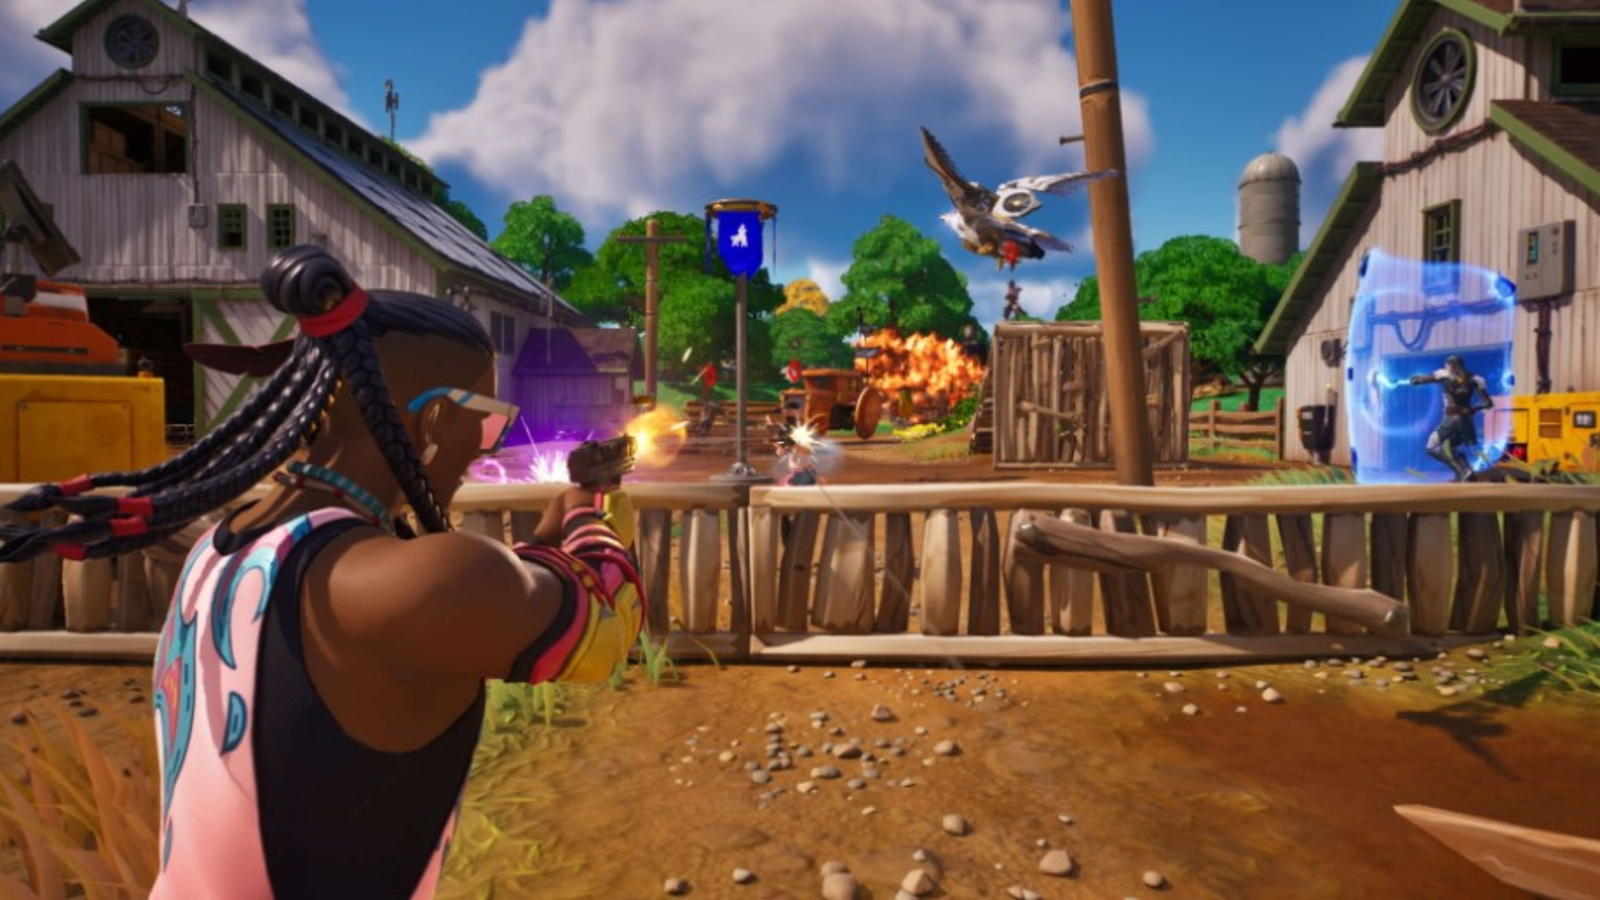 Play Fortnite on PC with Xbox – Easy Guide